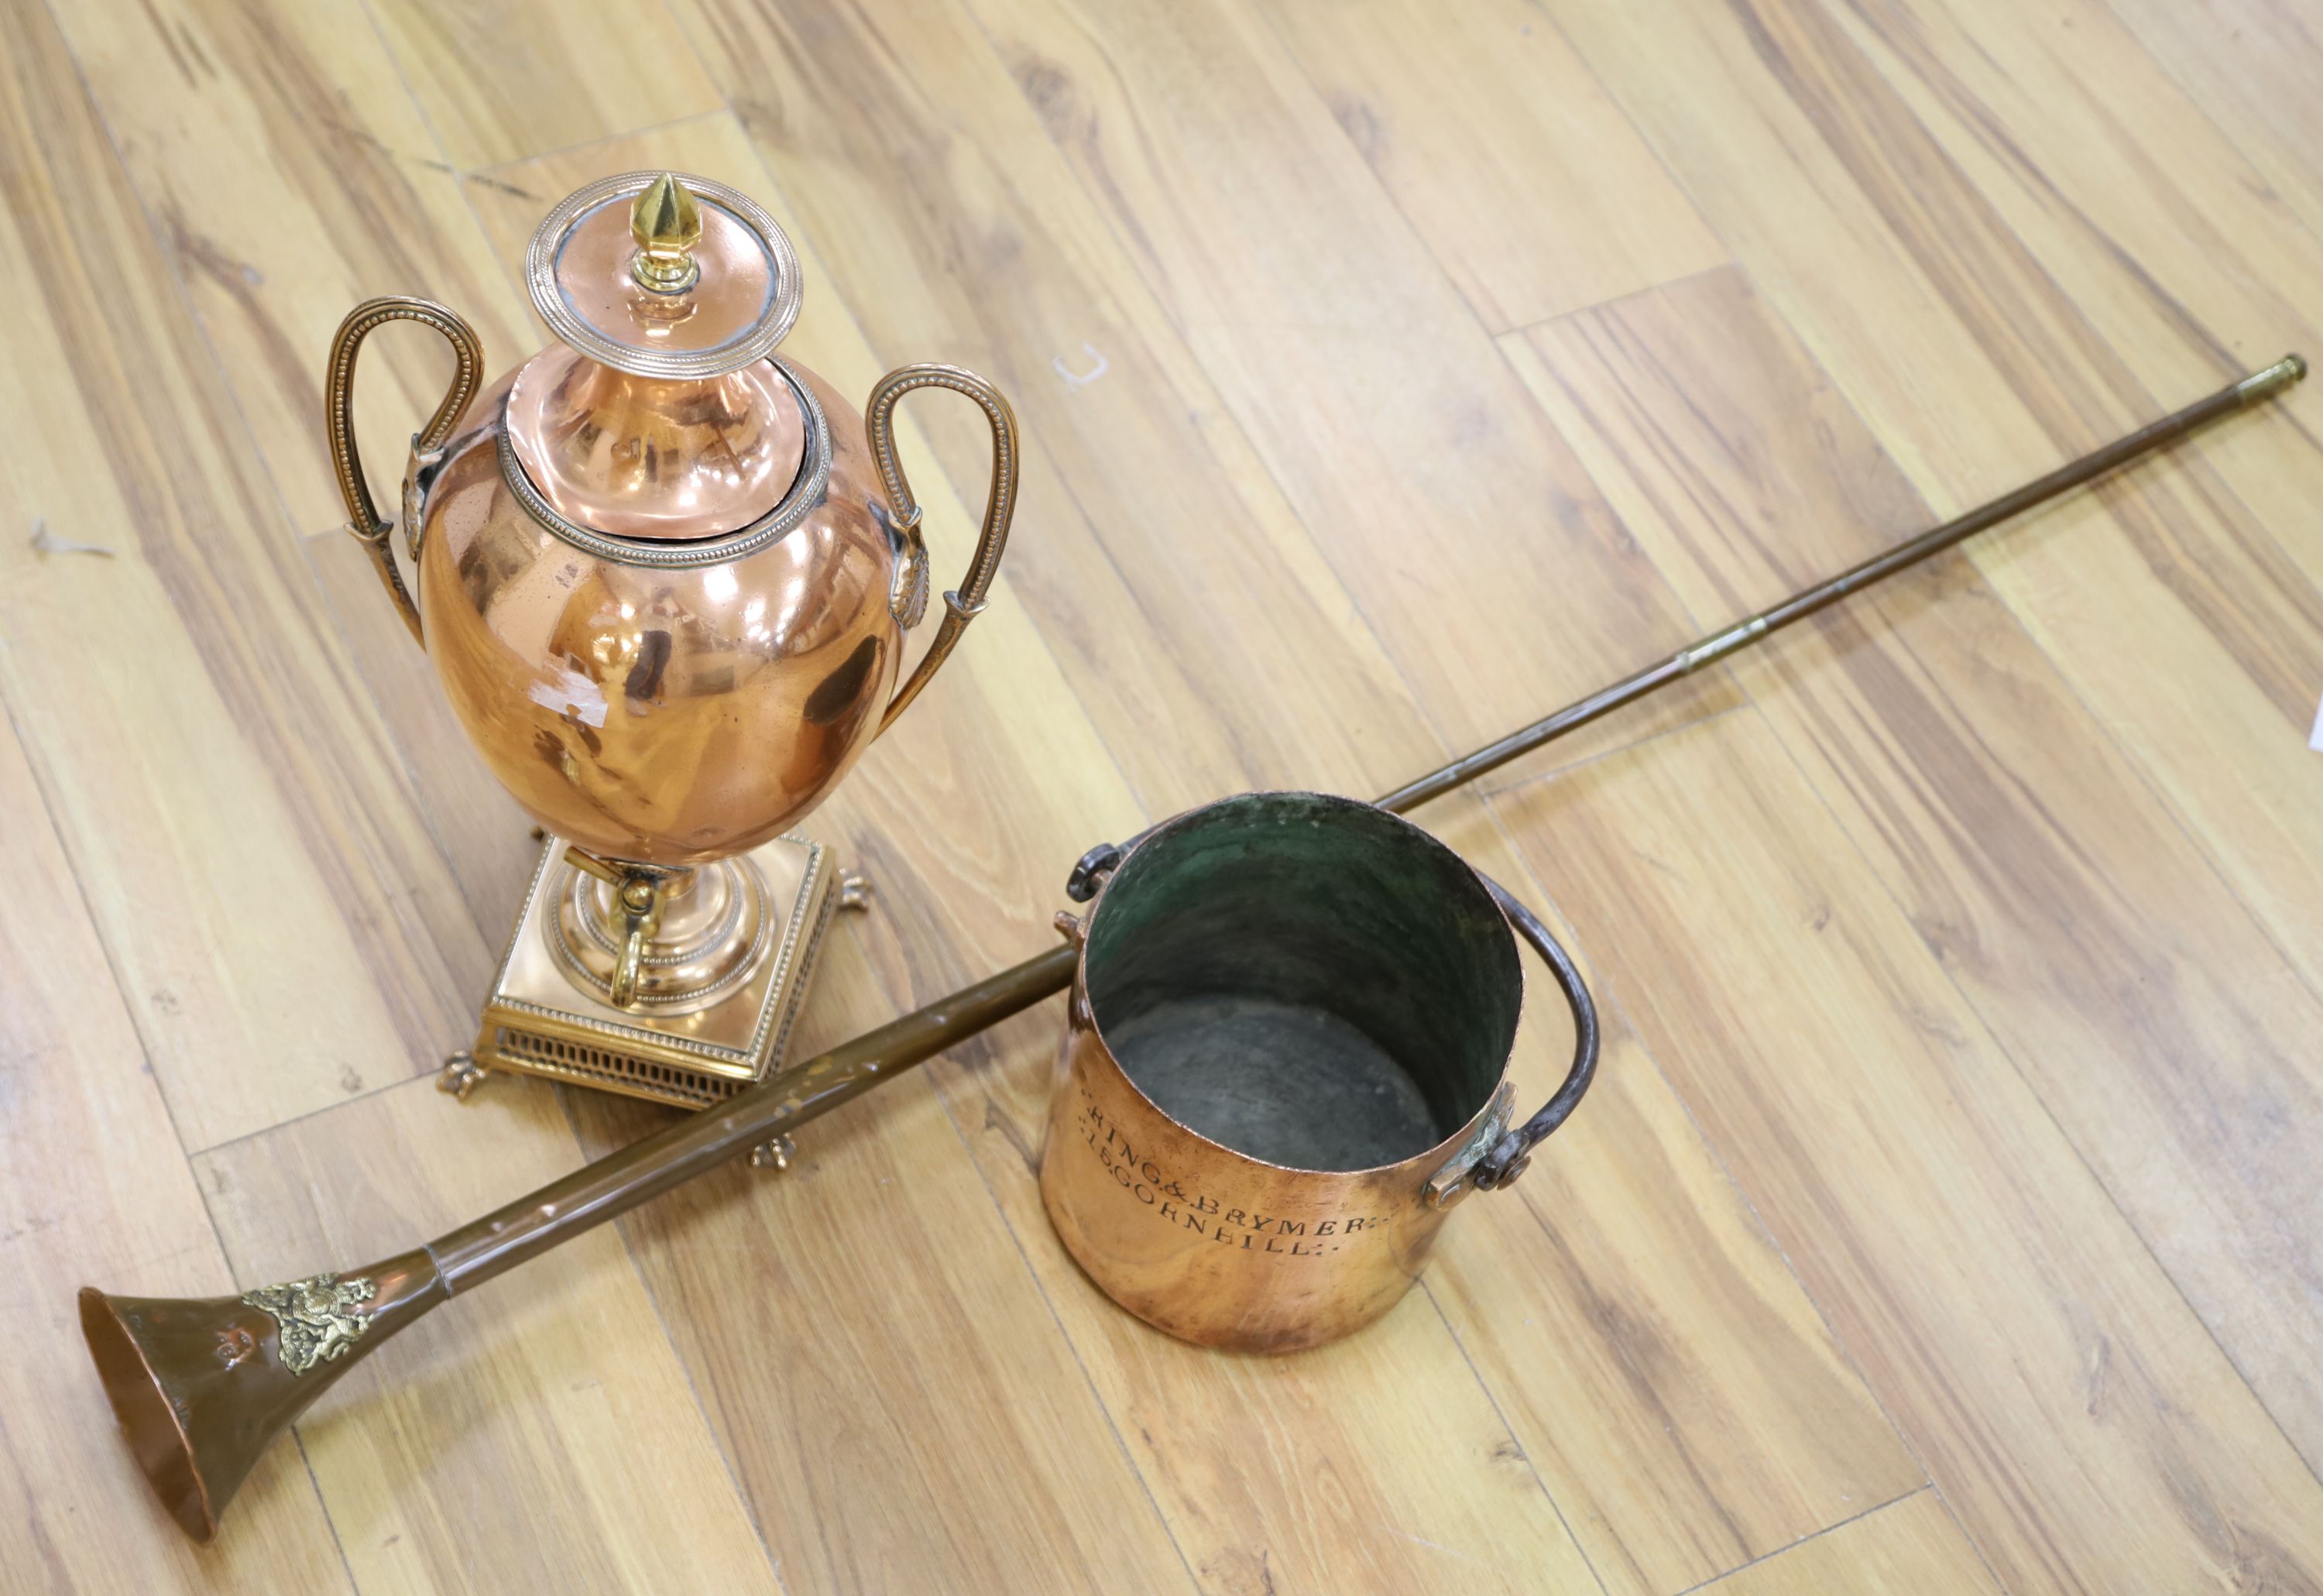 A Victorian copper measure, a coaching horn and a samovar